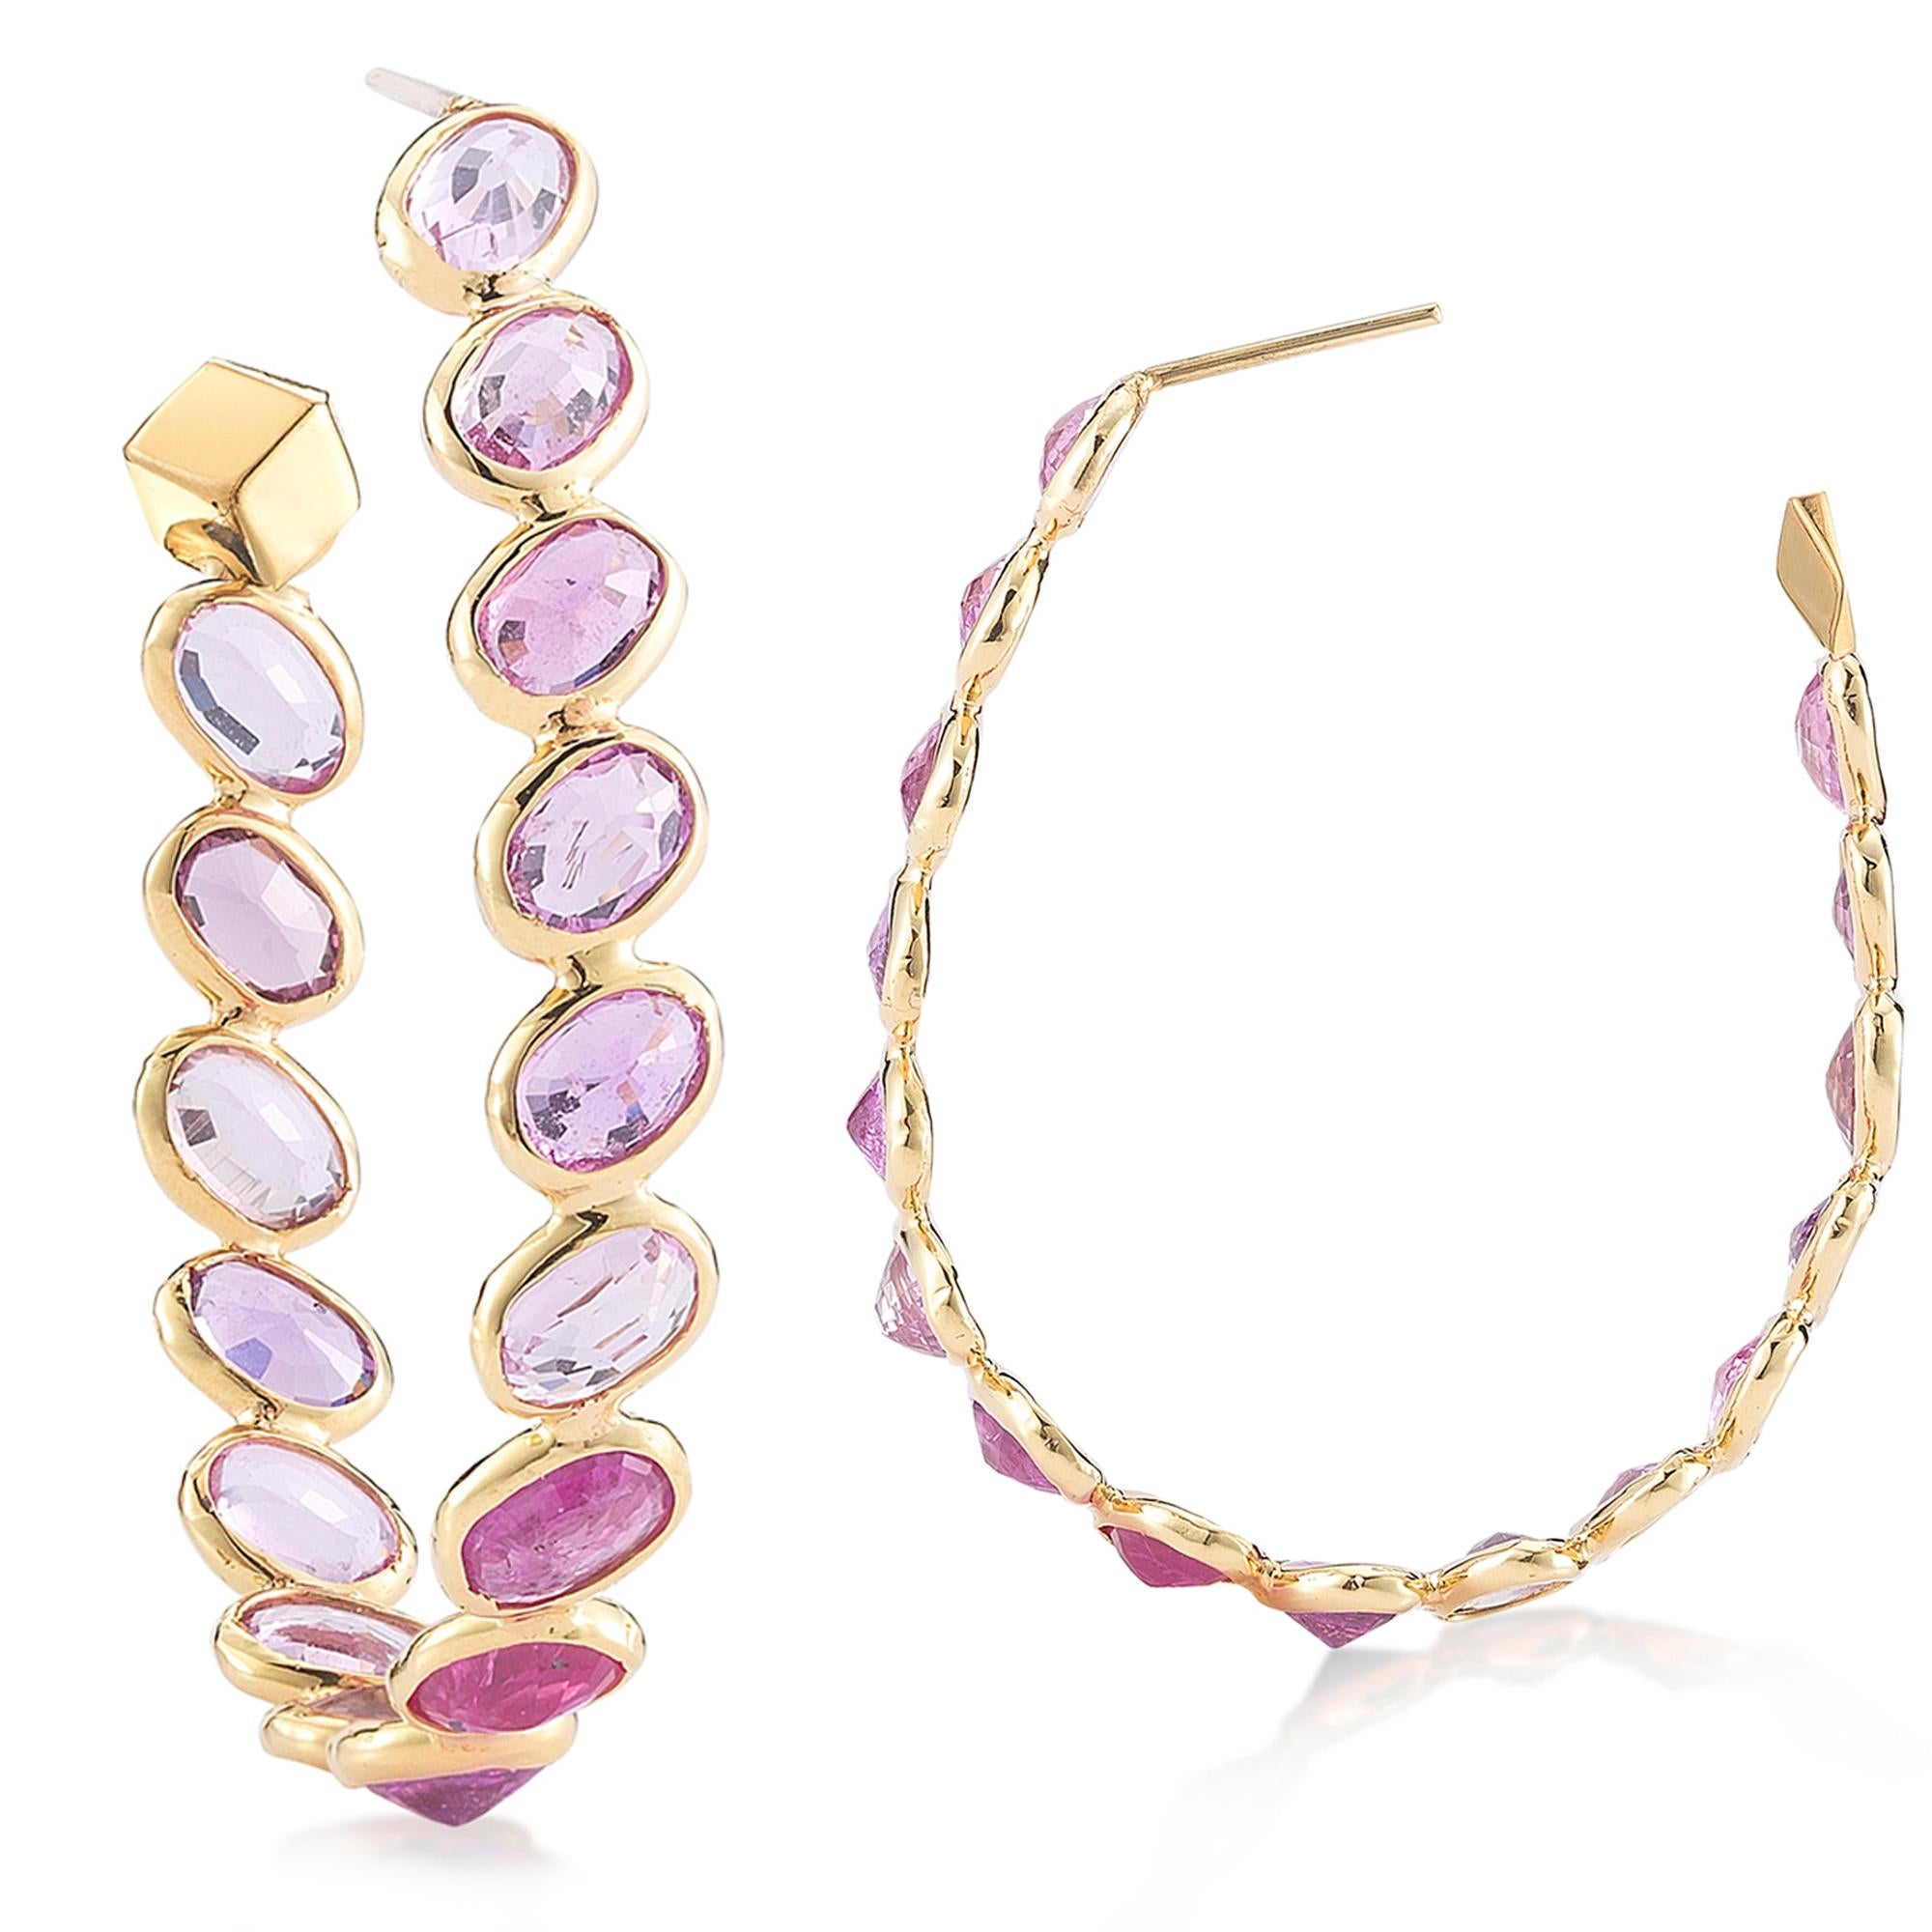 Contemporary Paolo Costagli 18 Karat Yellow Gold Pink Sapphire Ombre Hoop Earring Grande